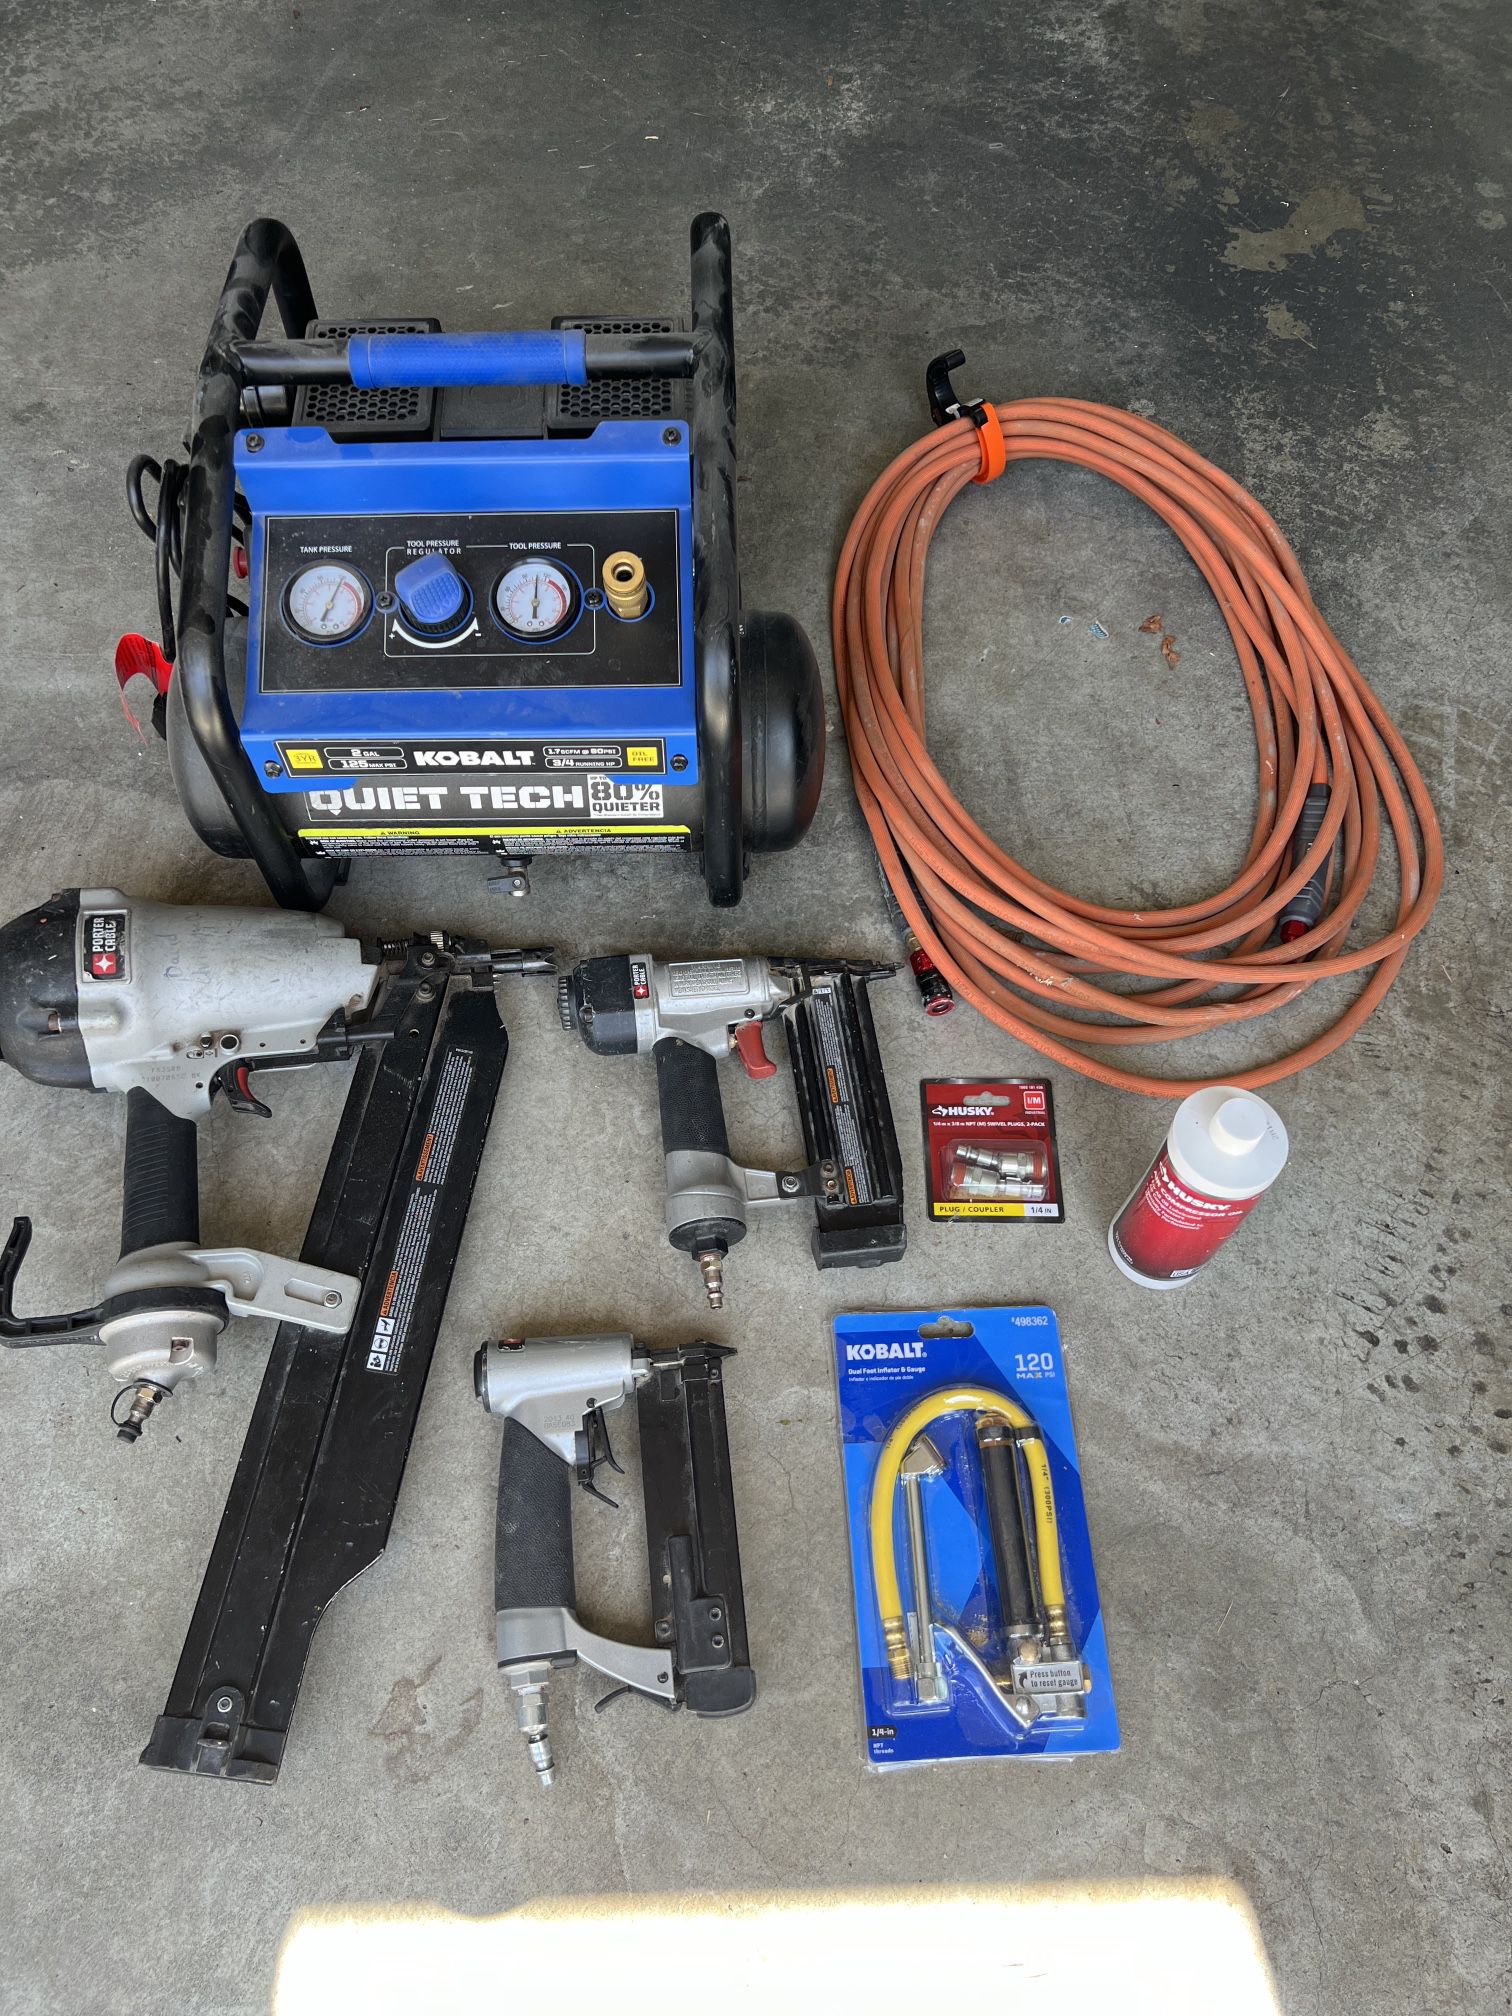 Kobalt Compressor, Porter Cable Pneumatic Nailers, 50ft. Rigid 1/4” Hose, And Accessories 